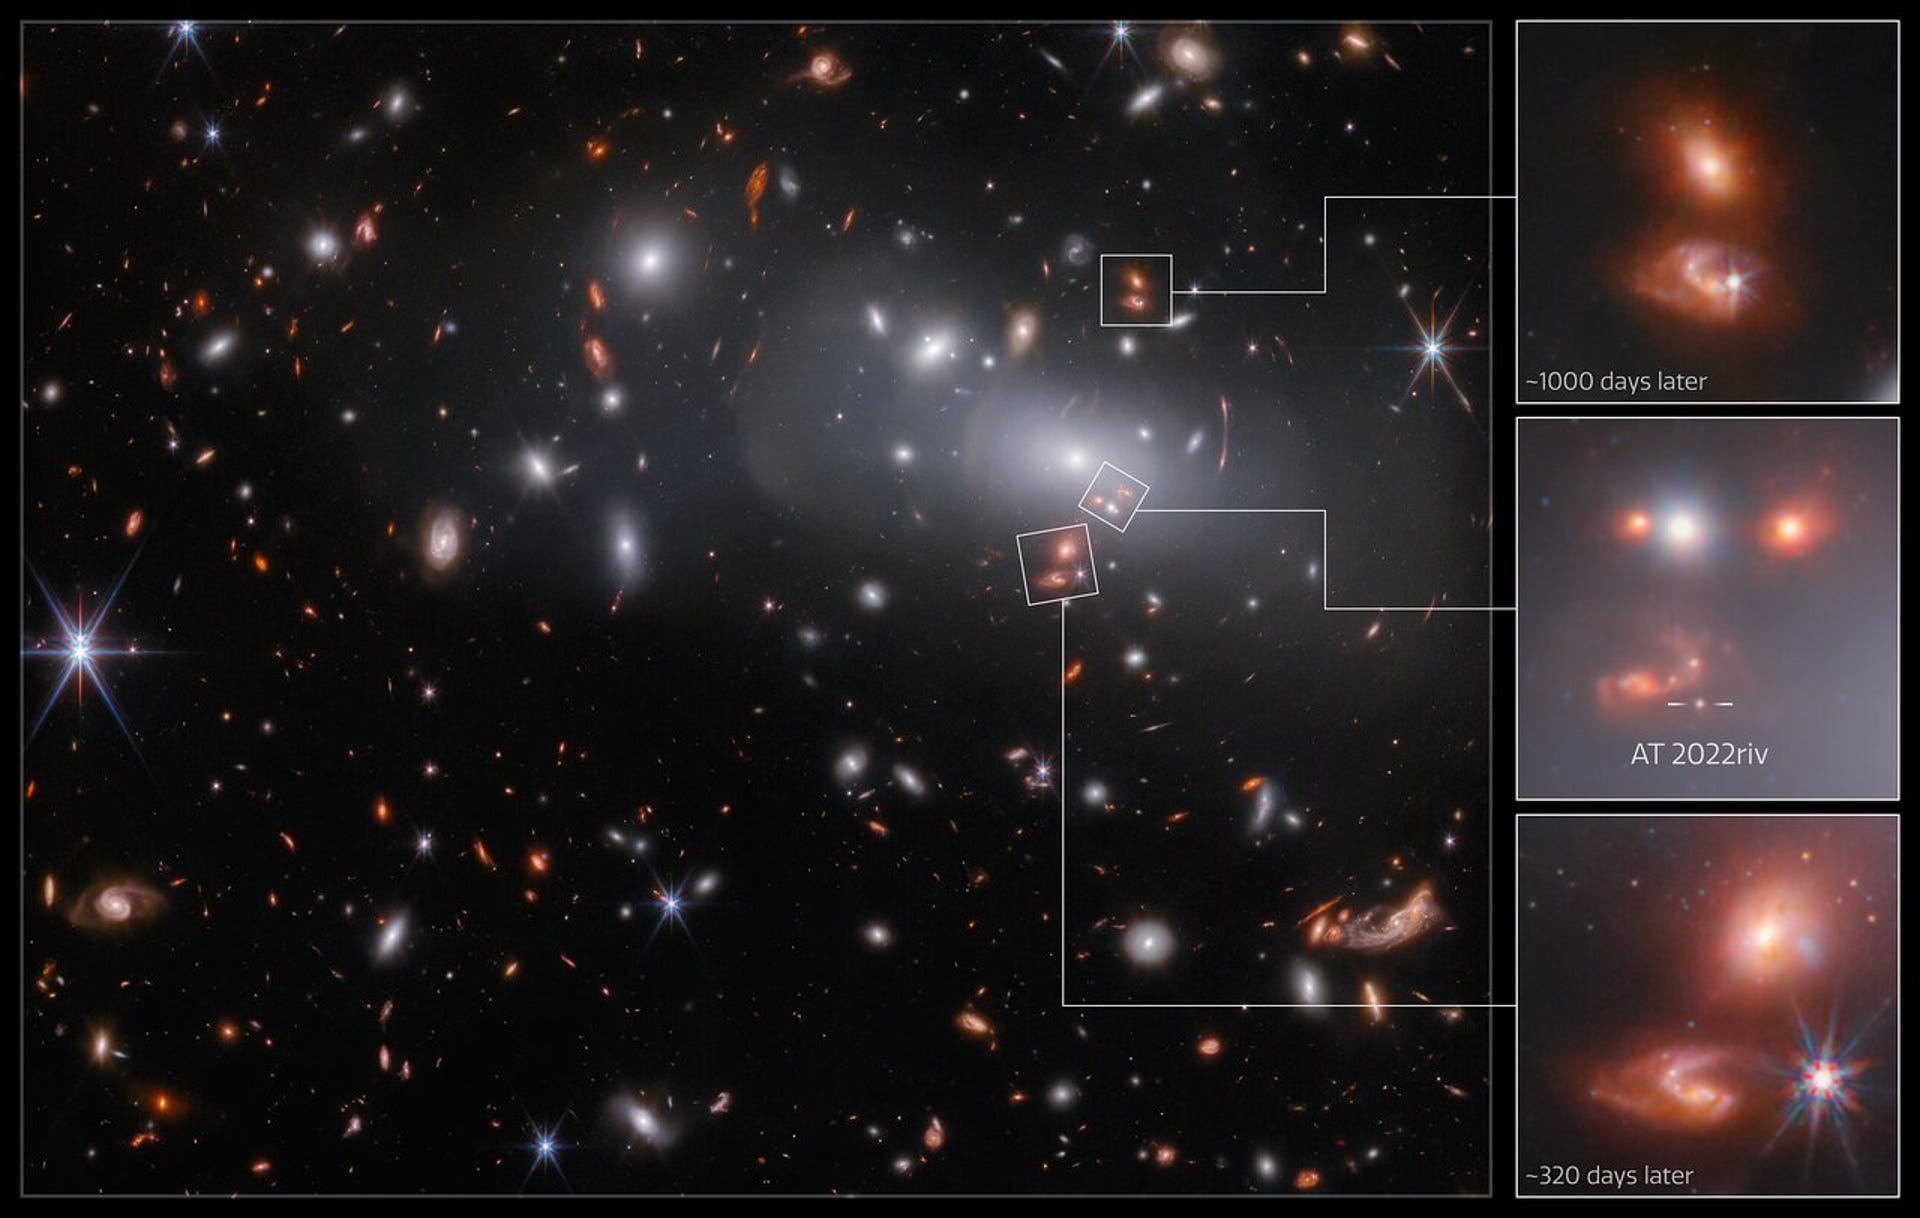 James Webb Space Telescope image with black space background and tons of assorted bright galaxies all willy-nilly. A cloudy area off the right shows three different views of the same background galaxy at three different times. Annotations highlight the three different galaxy views along with how they came from different times. One shows a bright spot of a supernova explosion.